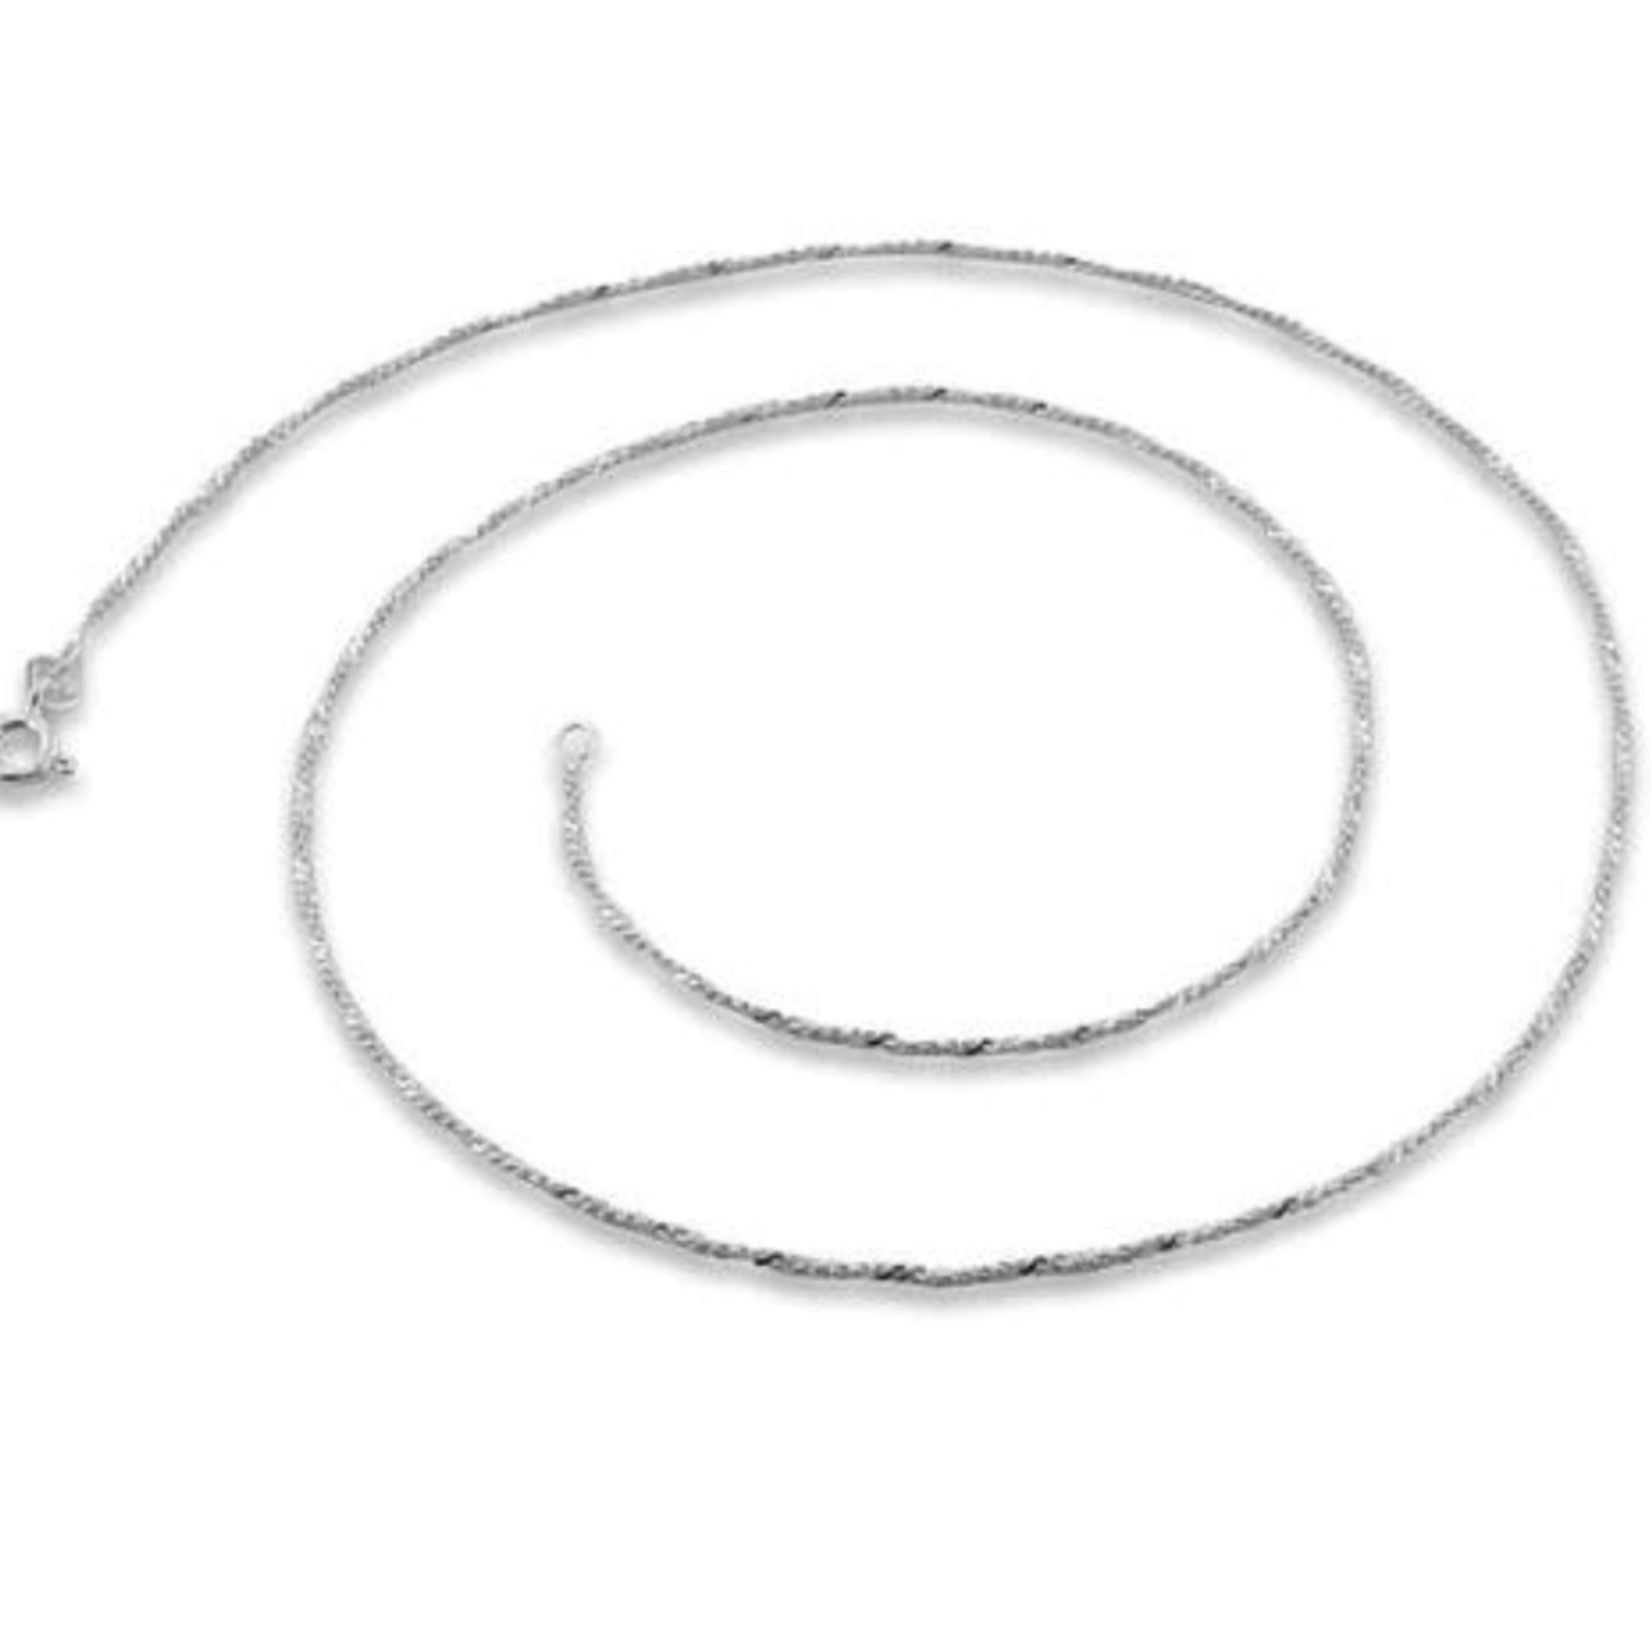 Silver Sterling Silver 1.4mm Twisted Serpentine Chain